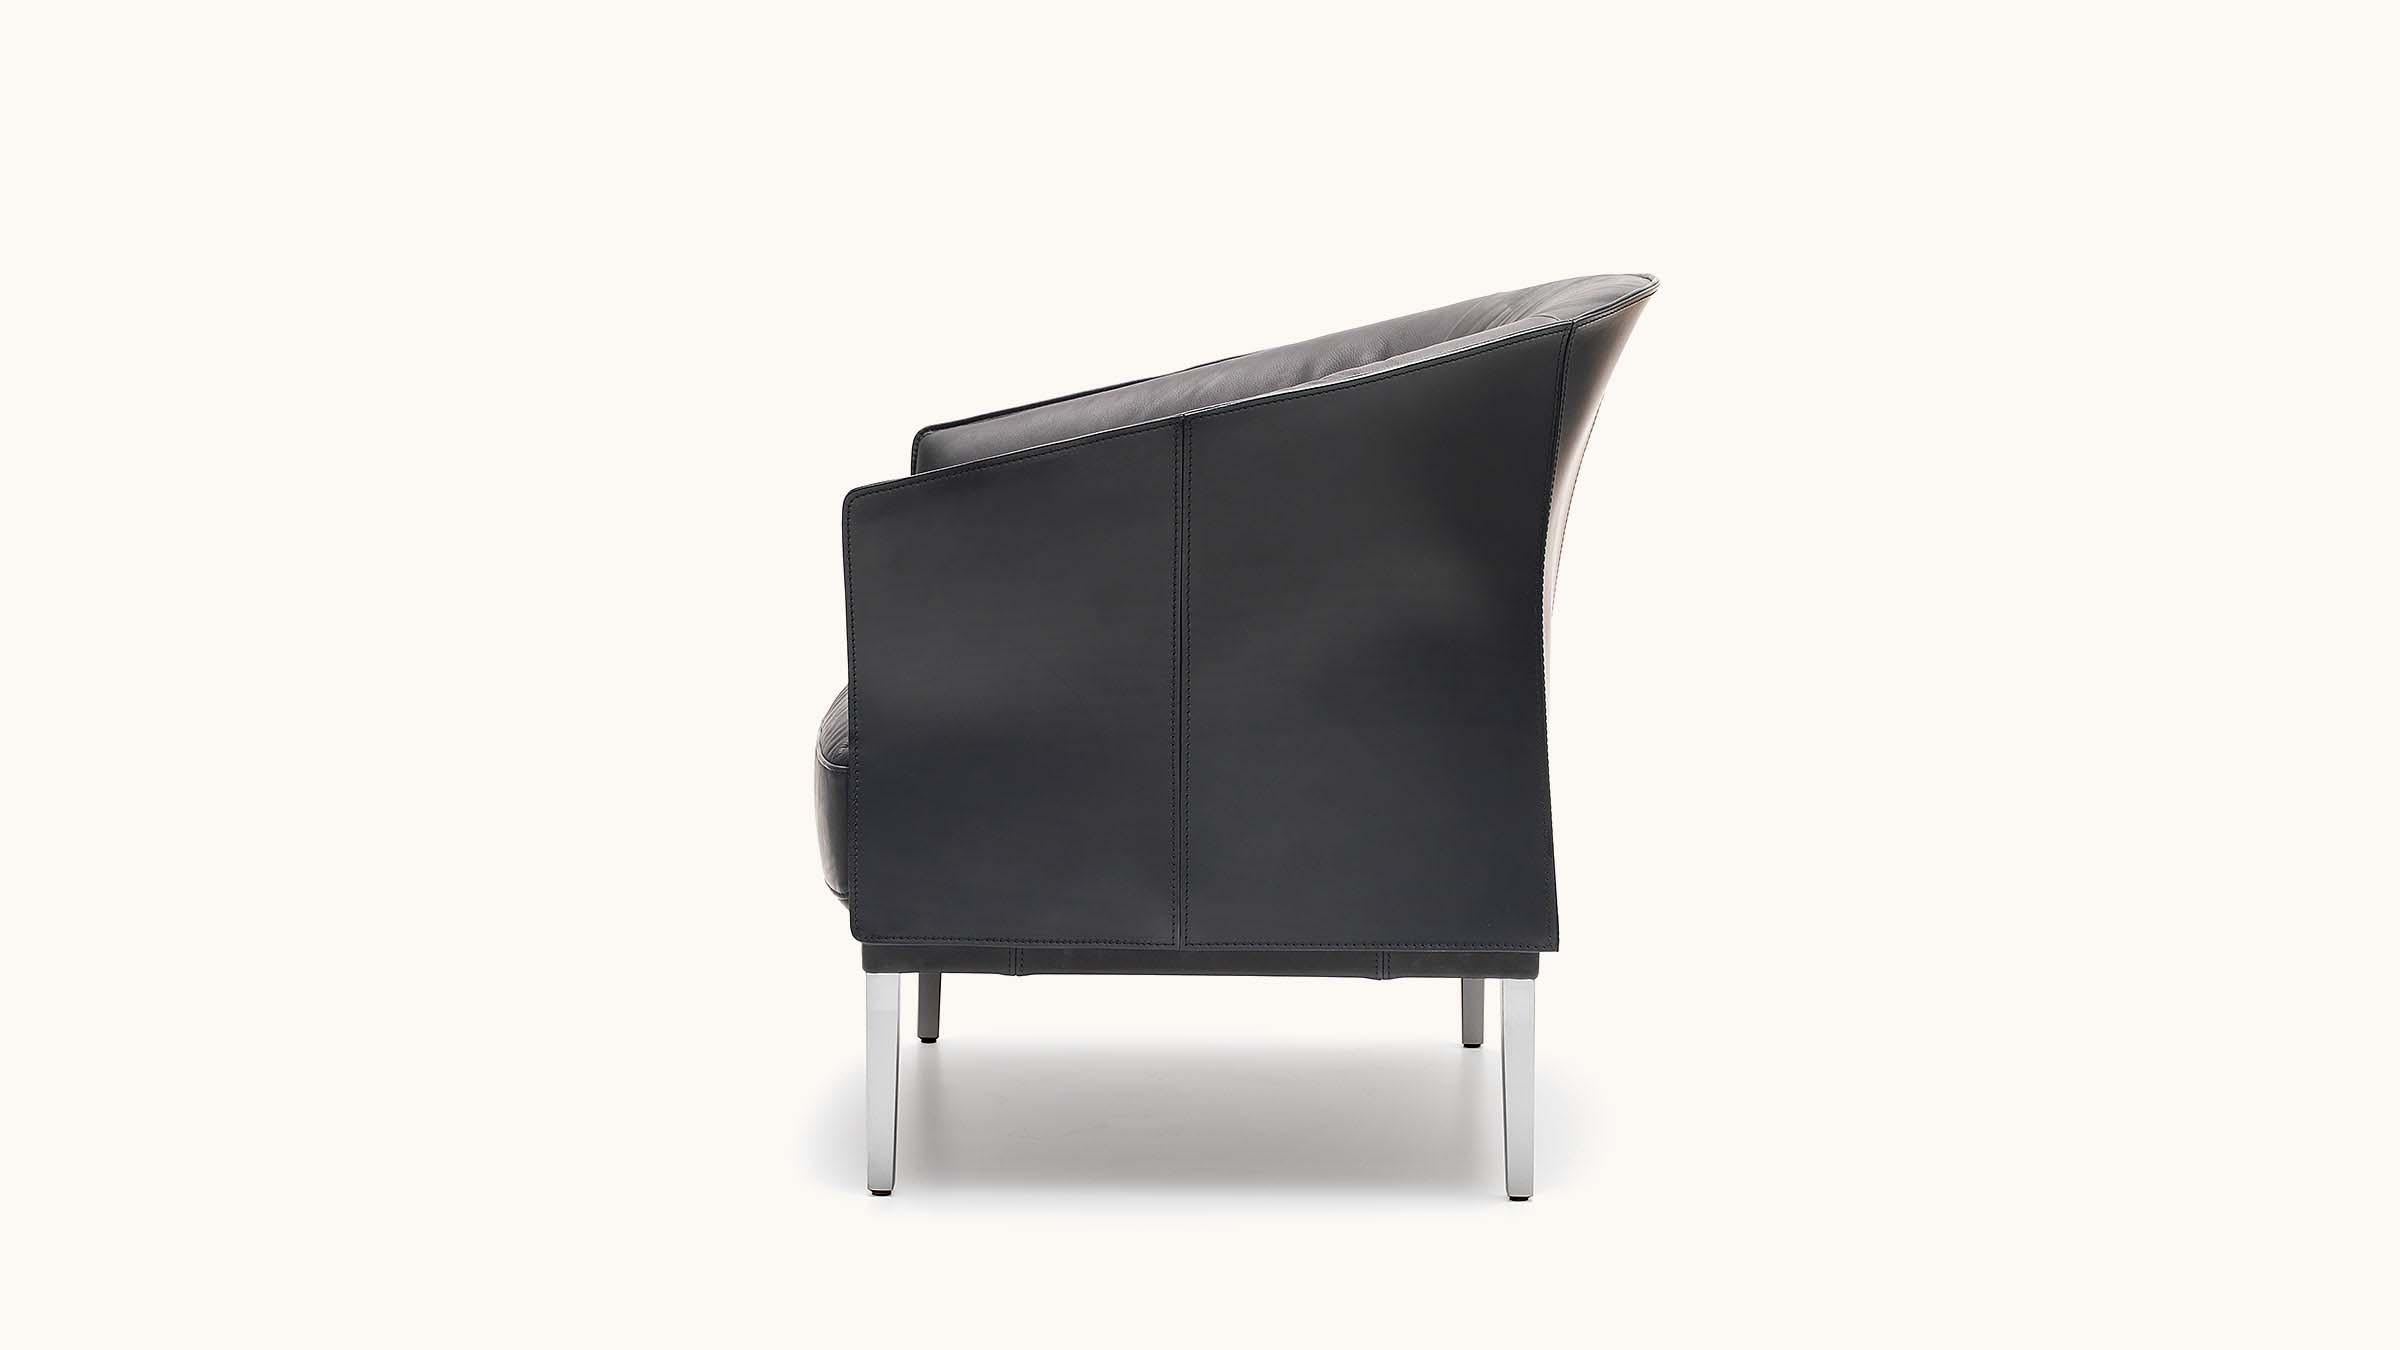 It’s like a chameleon: at first hidden and inconspicuous but due to his appearance it is adaptable and inexpressively full of character. We are talking about the dainty fauteuil DS-291. Despite its compact appearance, the DS-291 is ideally suited to